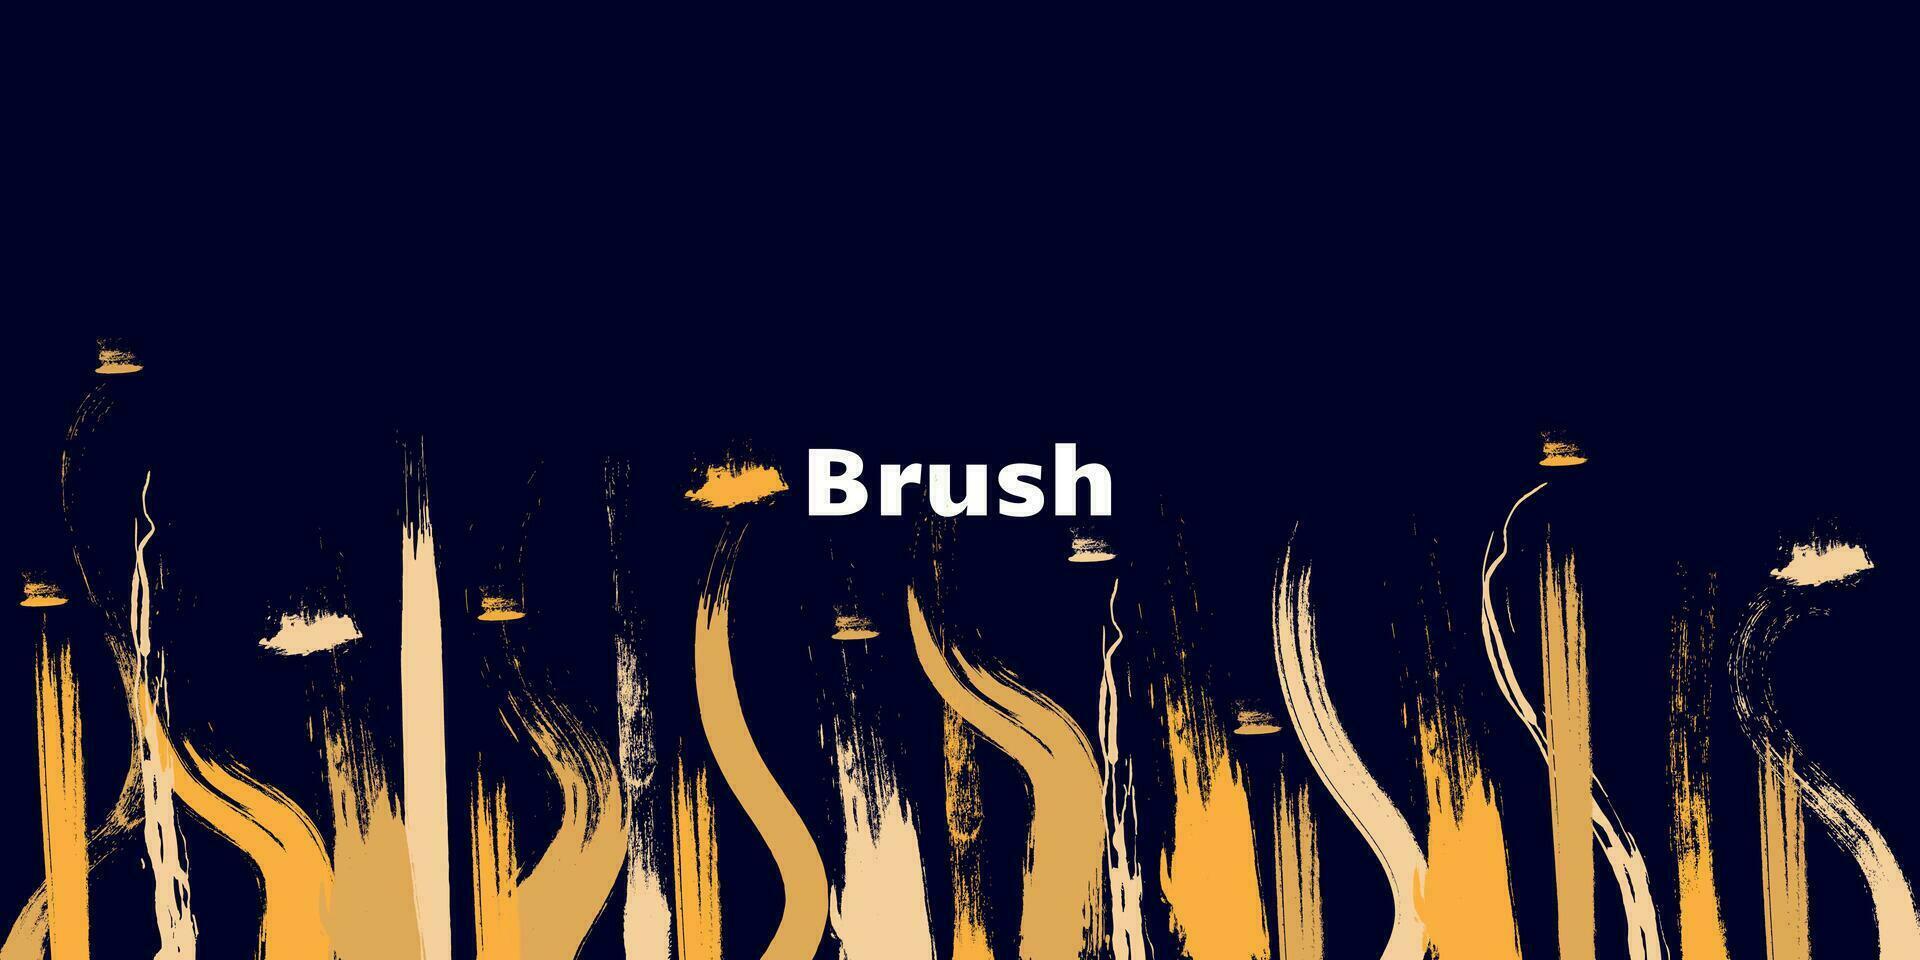 Abstract and Dynamic Brush Background. Brush Stroke Illustration for Banner, Poster or Sports Background. Scratches and Texture Elements For Design vector